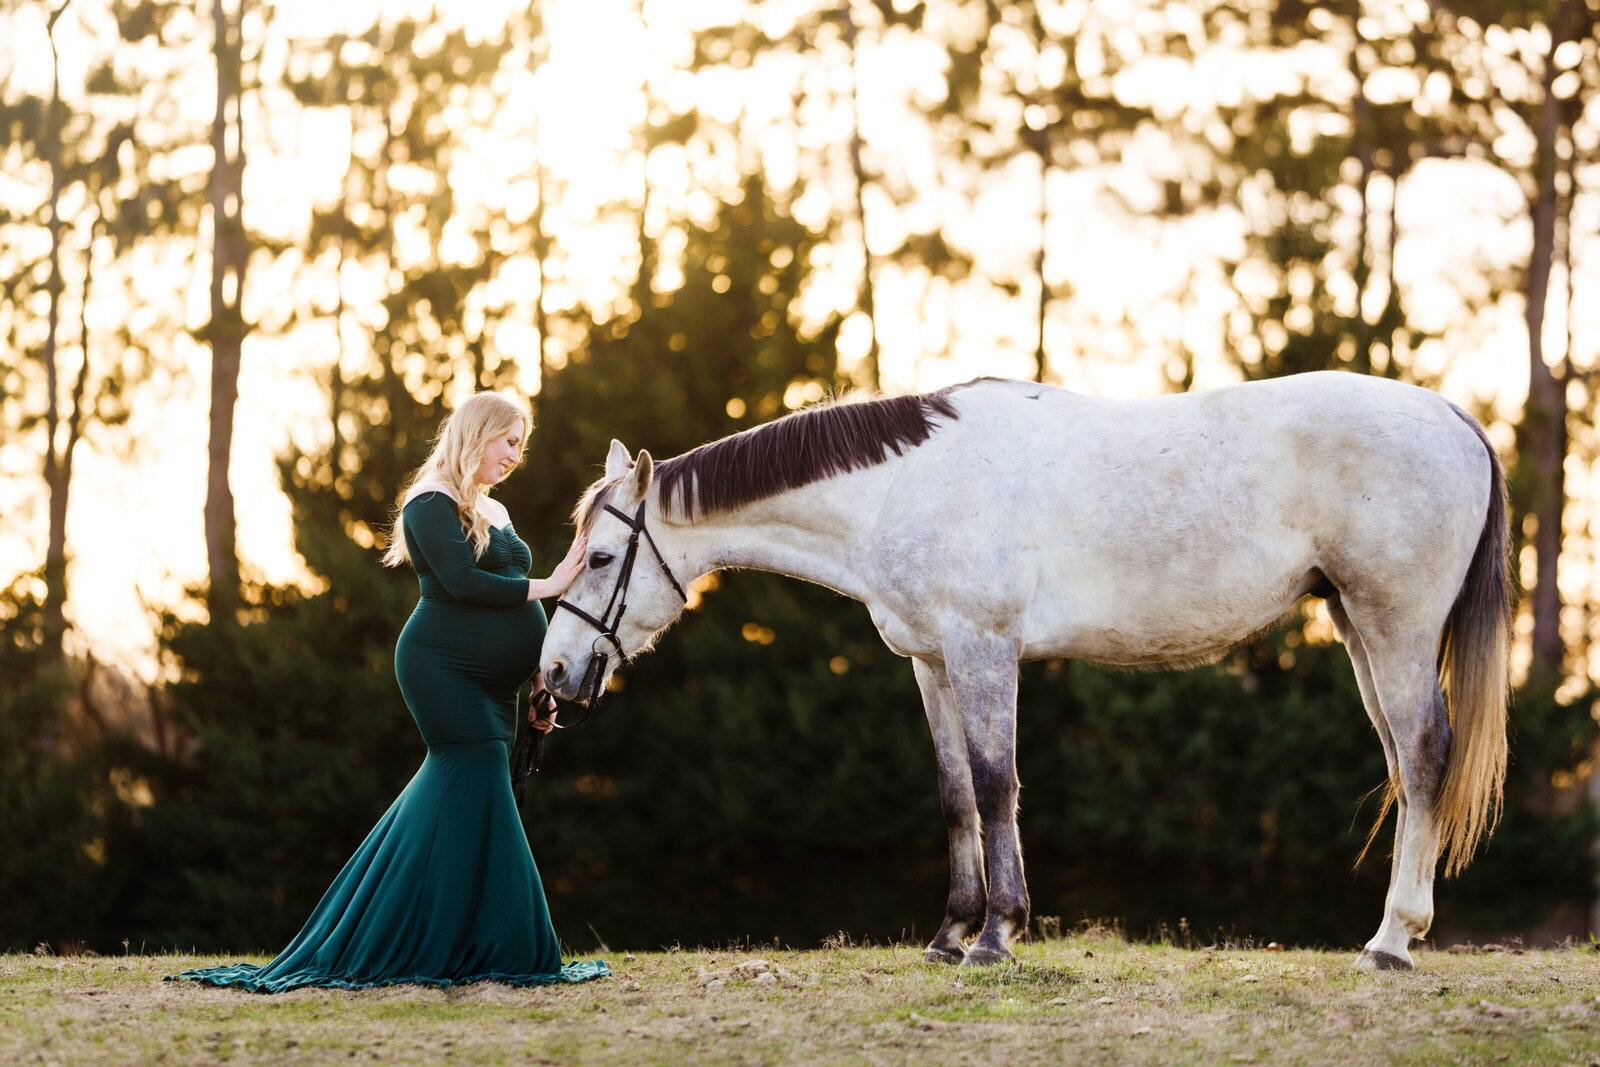 Knoxville TN Equestrian Photographer, Knoxville TN Equine Photographer, Knoxville TN Family Photographer, Farragut TN Equine Photographer, Farragut TN Equestrian Photographer, Farragut TN Photographer, Horses, Farragut TN Horses,  Knoxville TN Horses